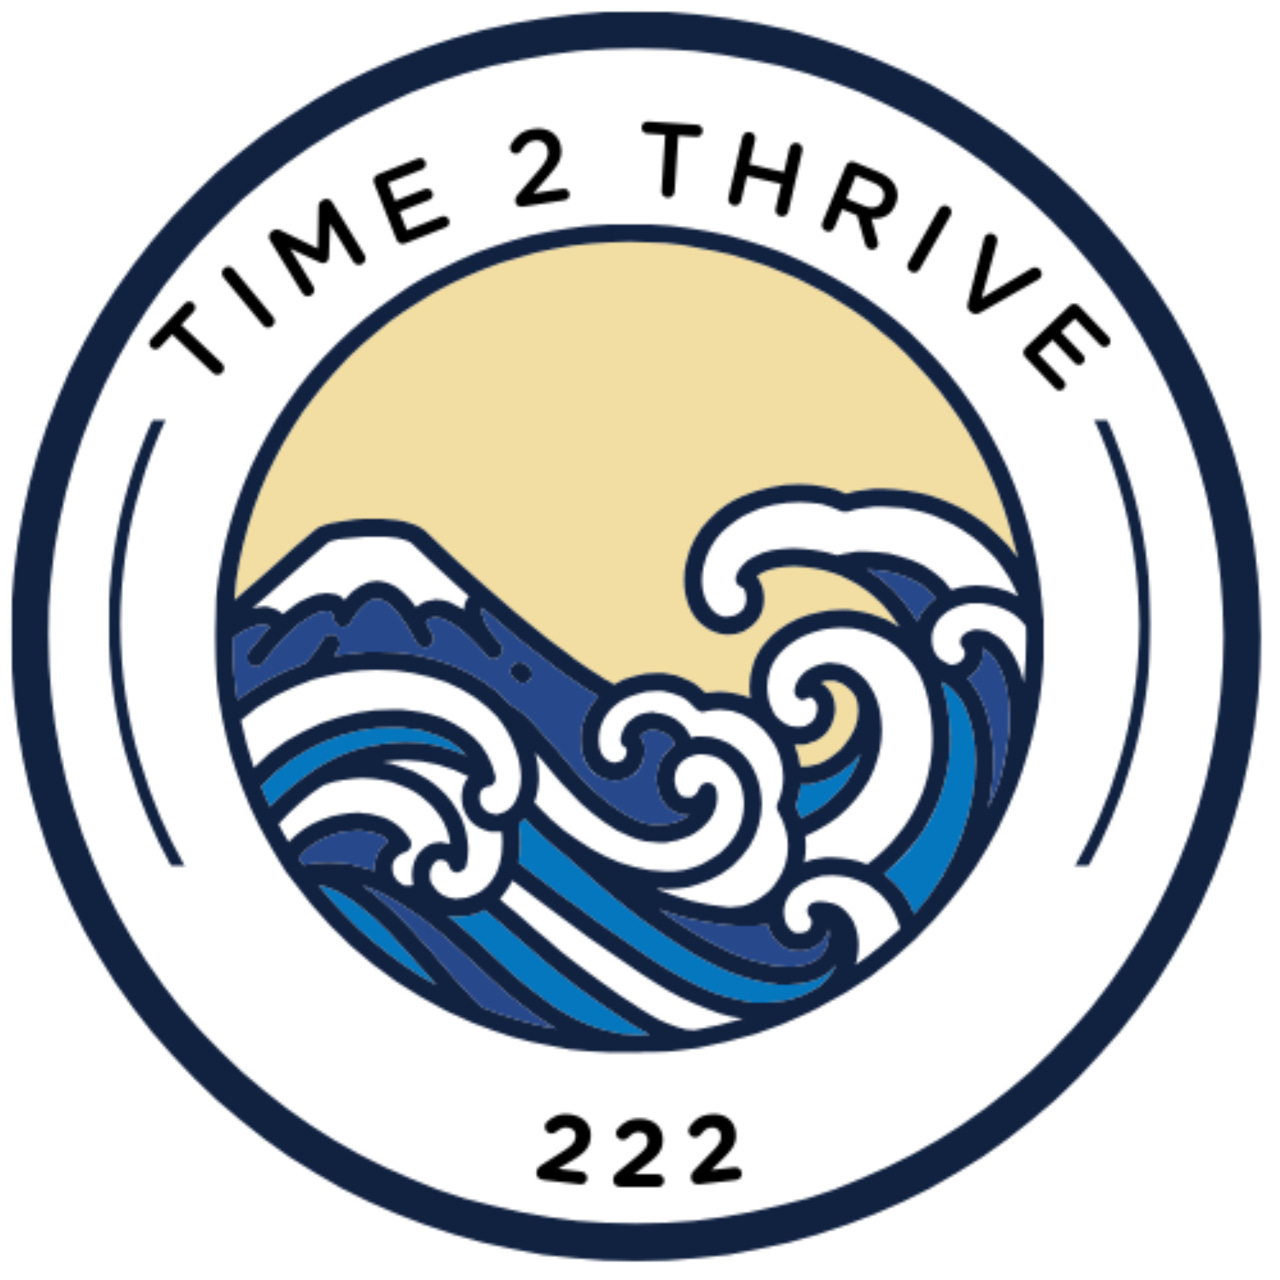 Artwork for Time2Thrive